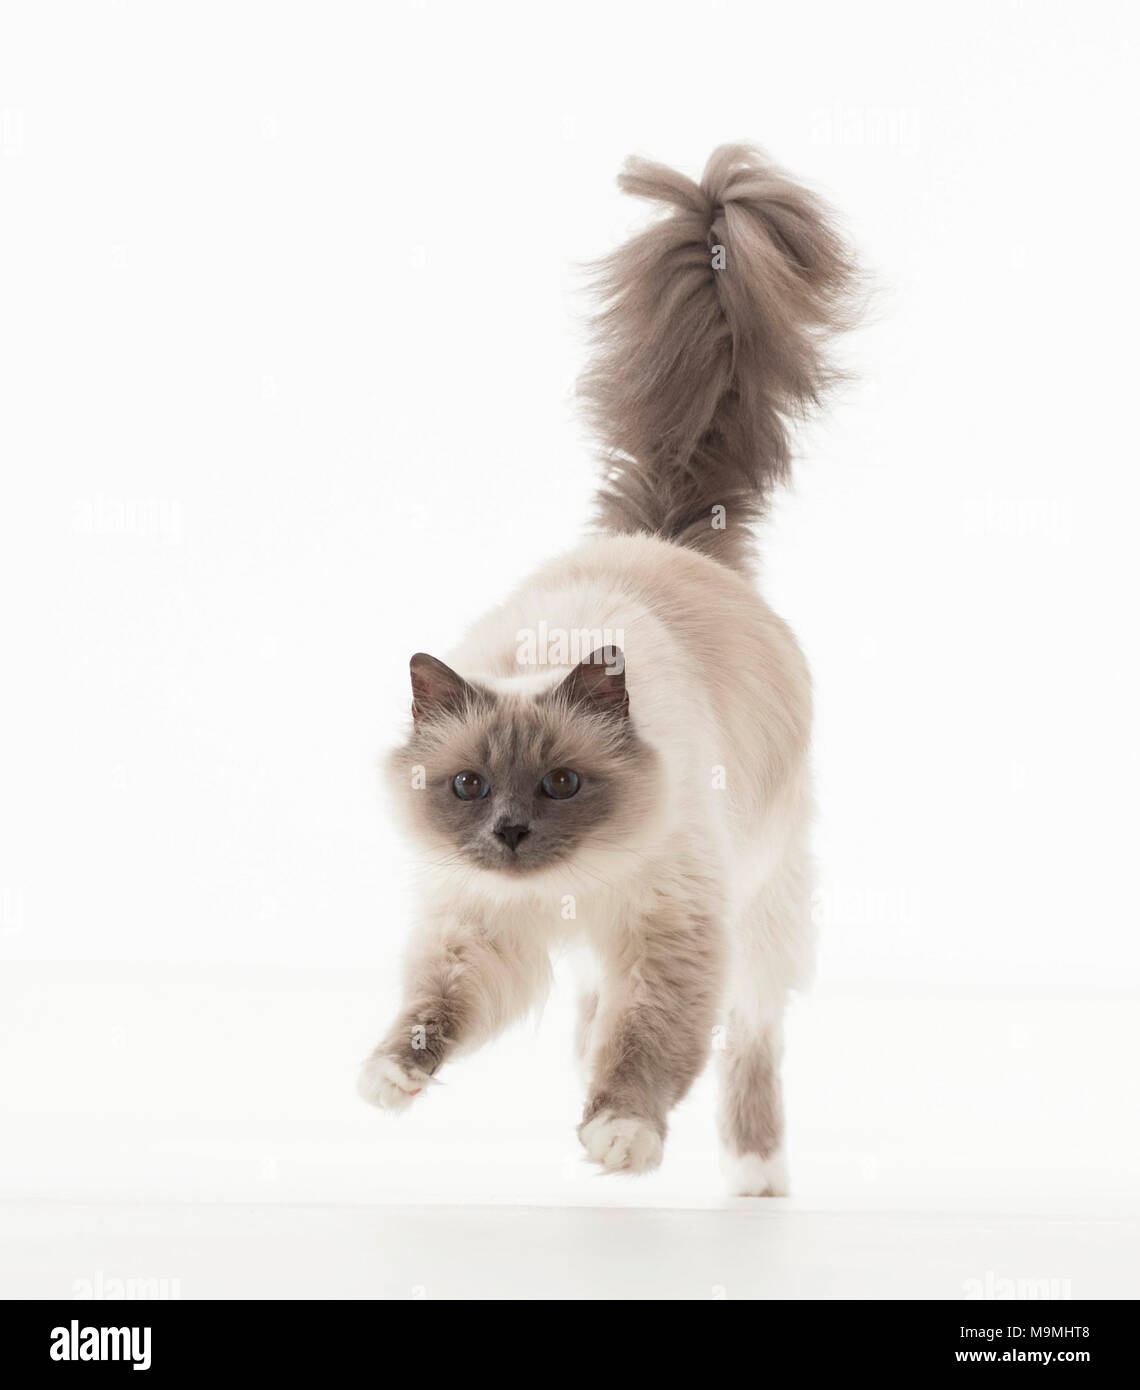 Sacred cat of Burma. Adult running. Studio picture against a white background. Germany Stock Photo